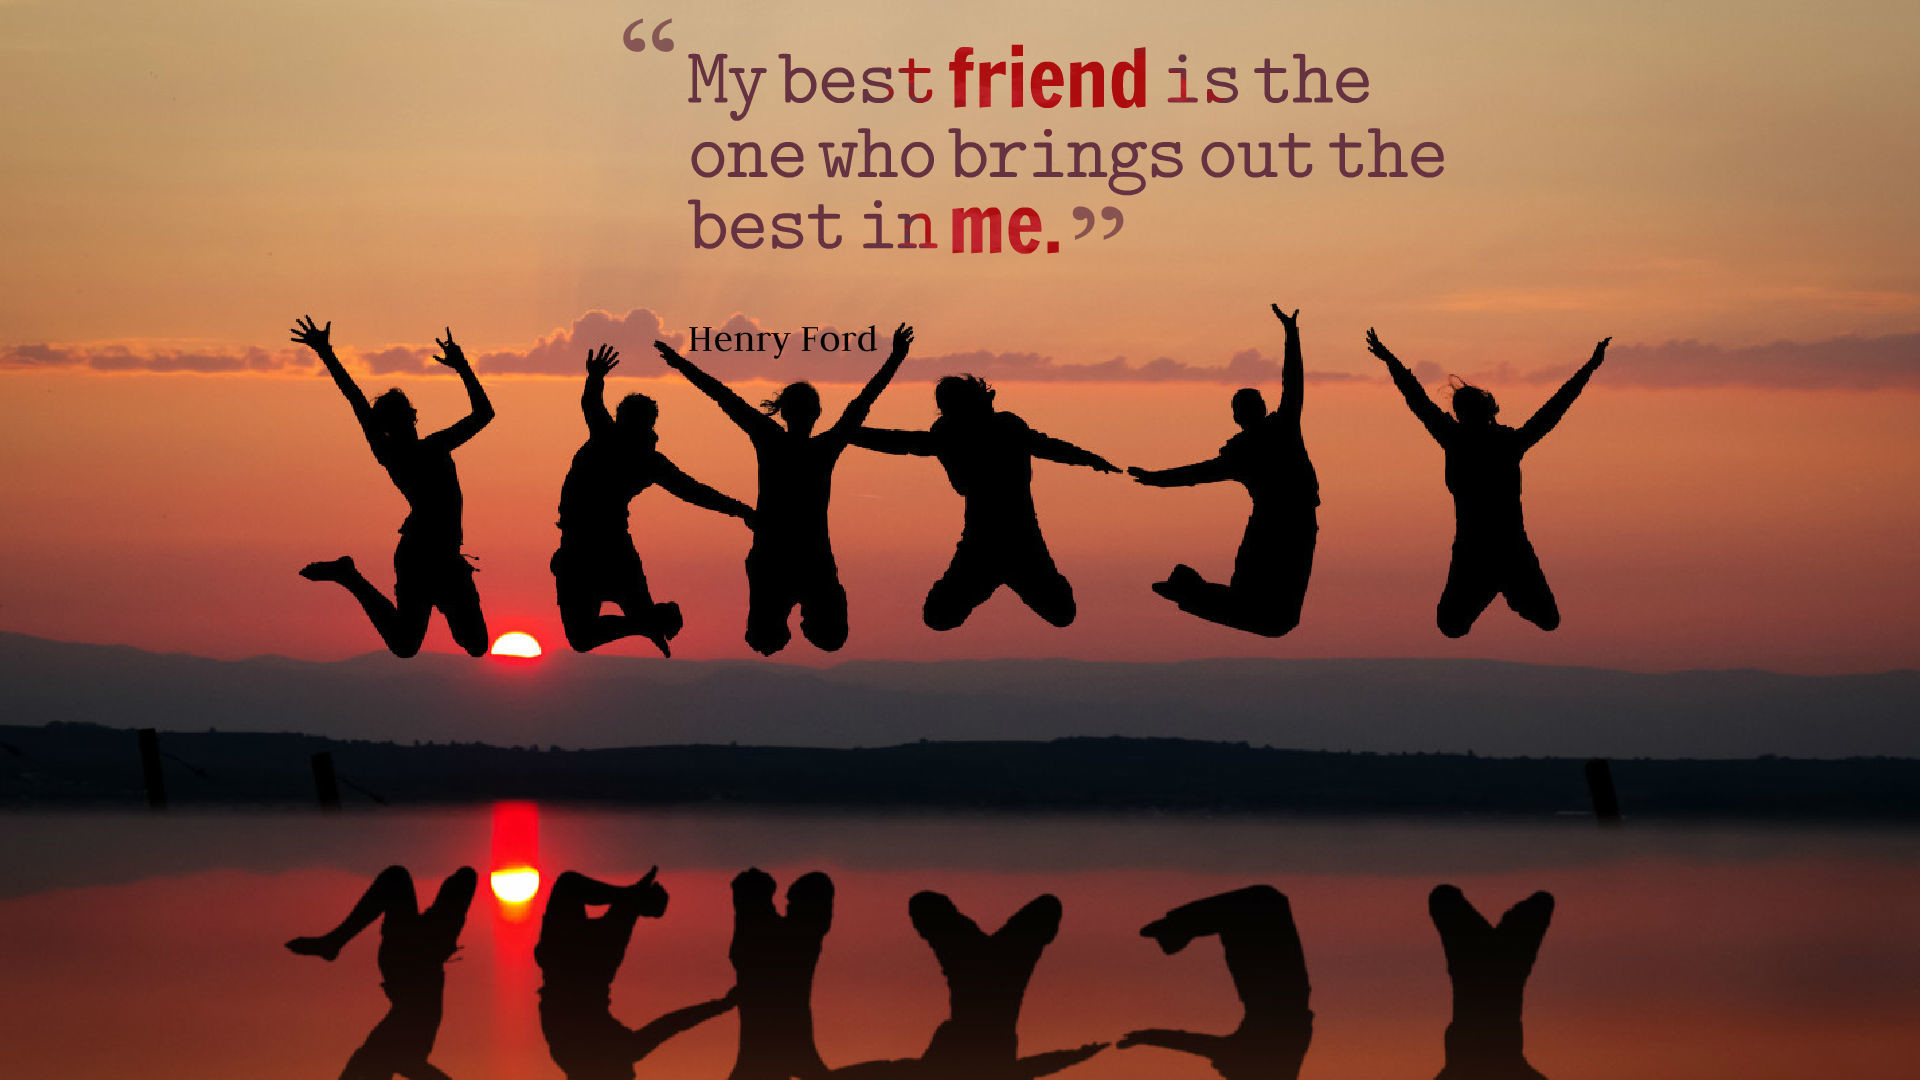 1920x1080 1280x1024 Friendship Wallpapers Group with 26 items